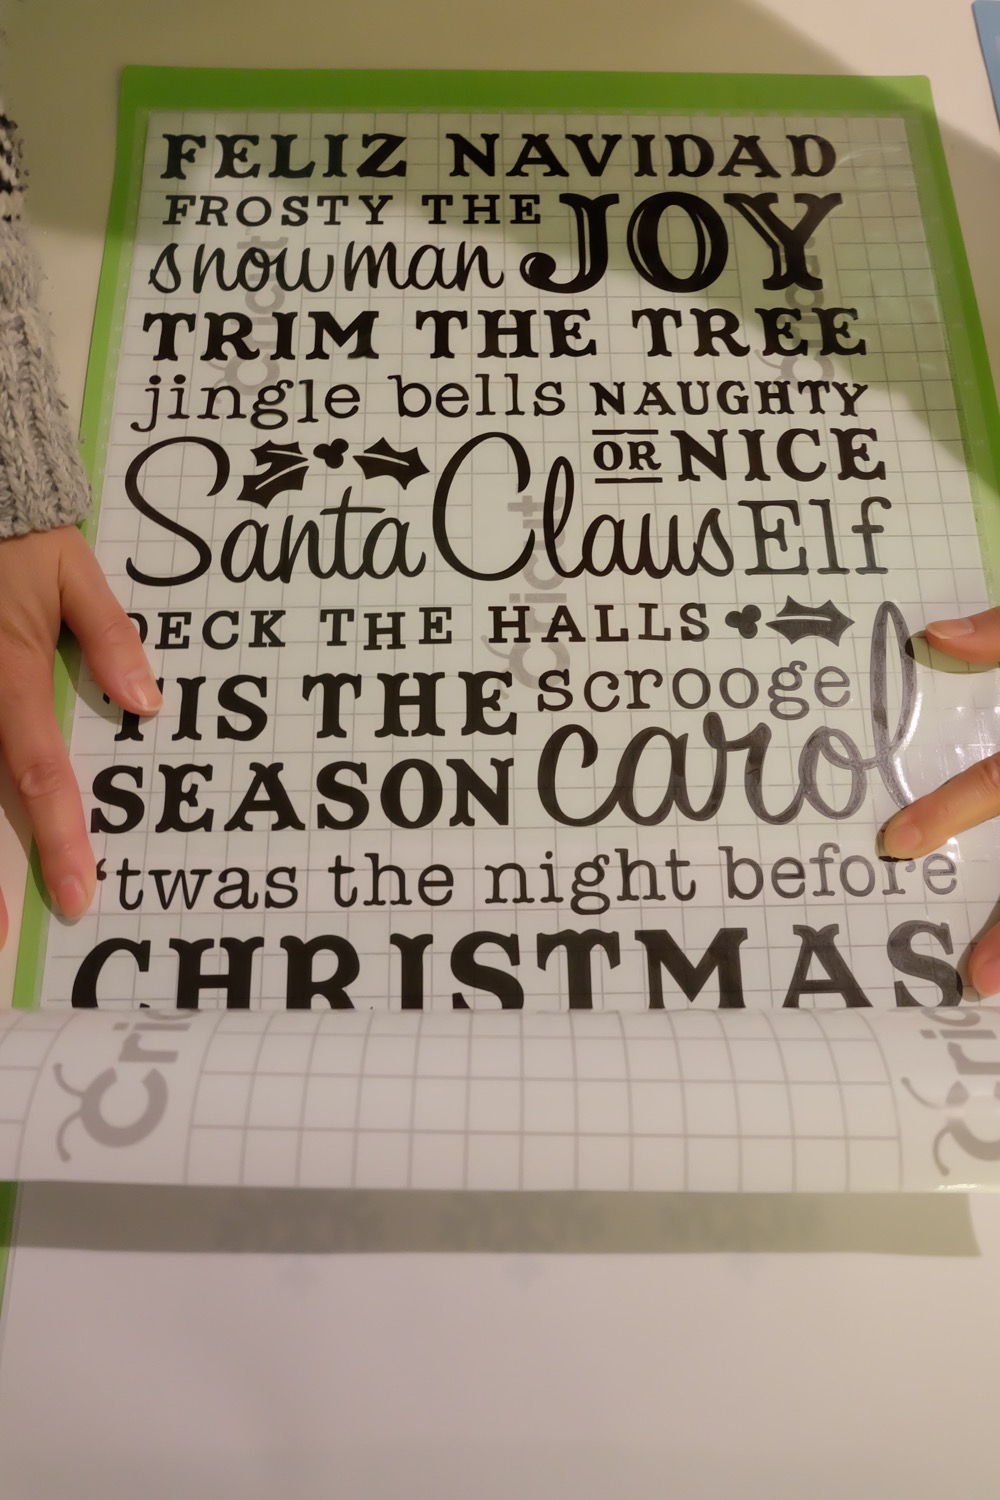 Use your Cricut Explore or Cricut Maker to make a gorgeous DIY Christmas Word Art Canvas Sign! Filled with all the words that make Christmas so special, this handmade Christmas decor will brighten any home! Made with a canvas you can find at the dollar store. This craft project would make a great inexpensive handmade Christmas Gift! #Cricut #CricutProject #DIY #Christmas #HandmadeChristmas